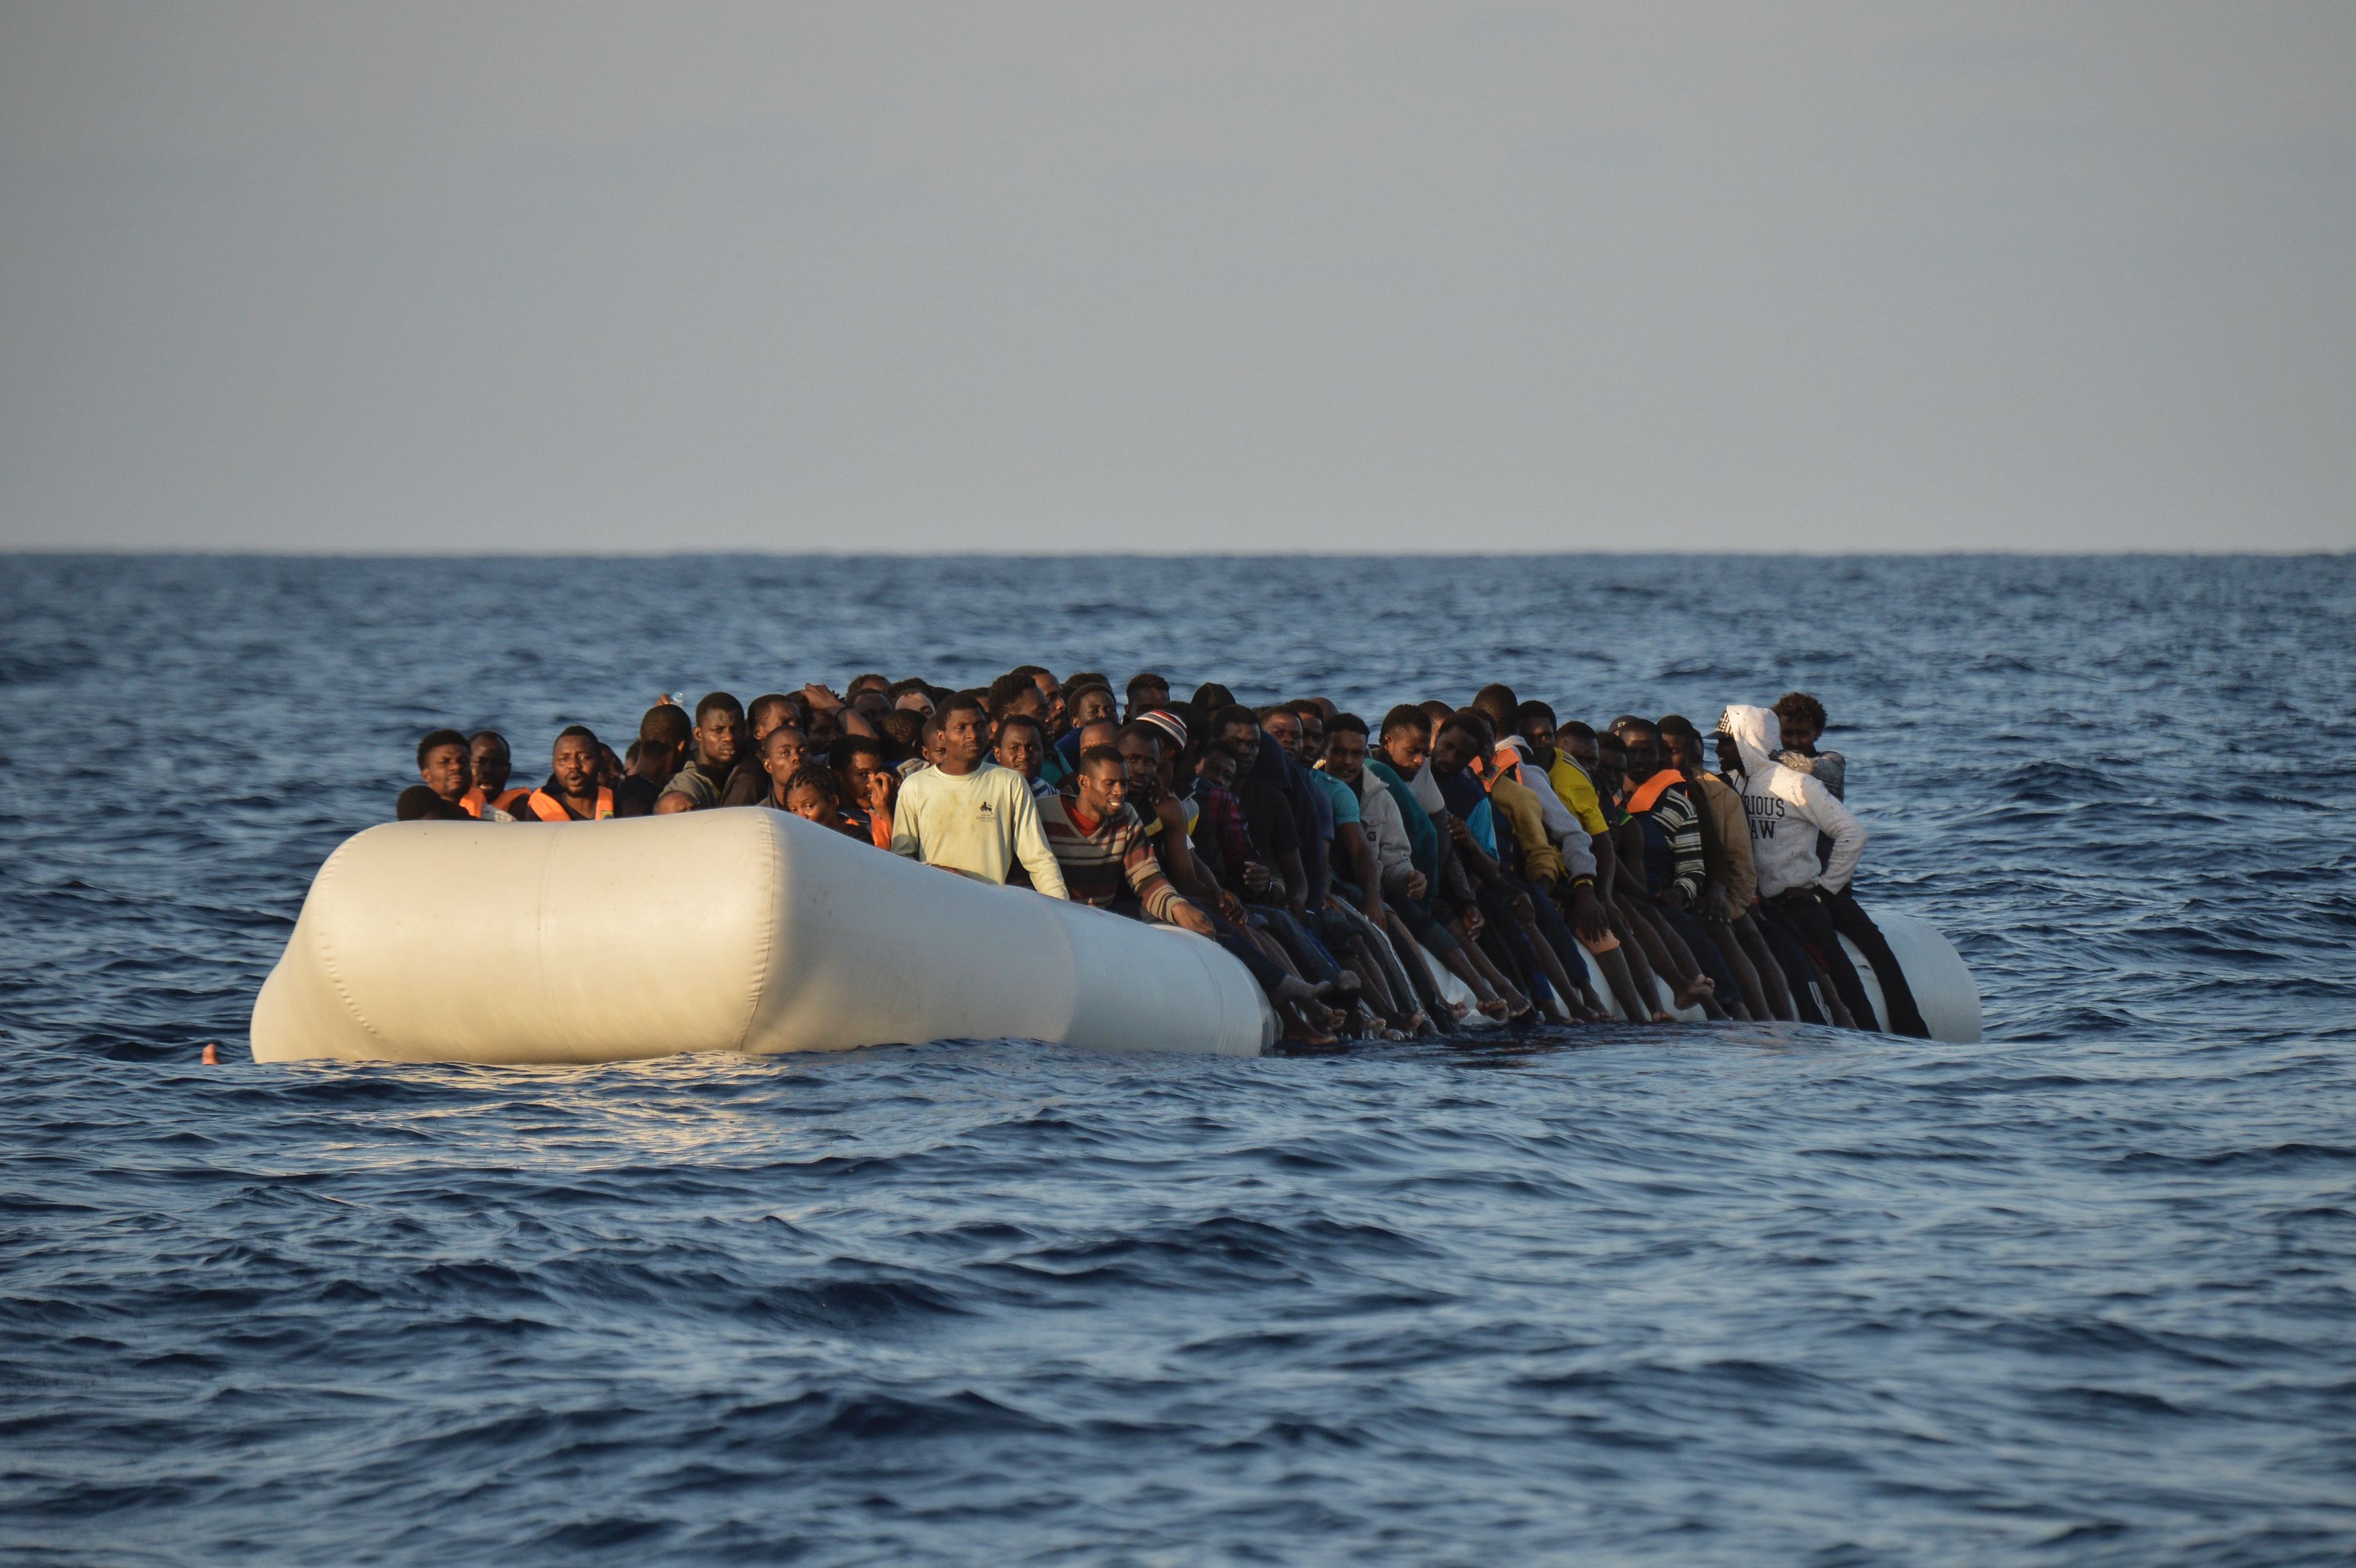 Some 1,400 migrants rescued, 8 bodies recovered: Italy coastguard